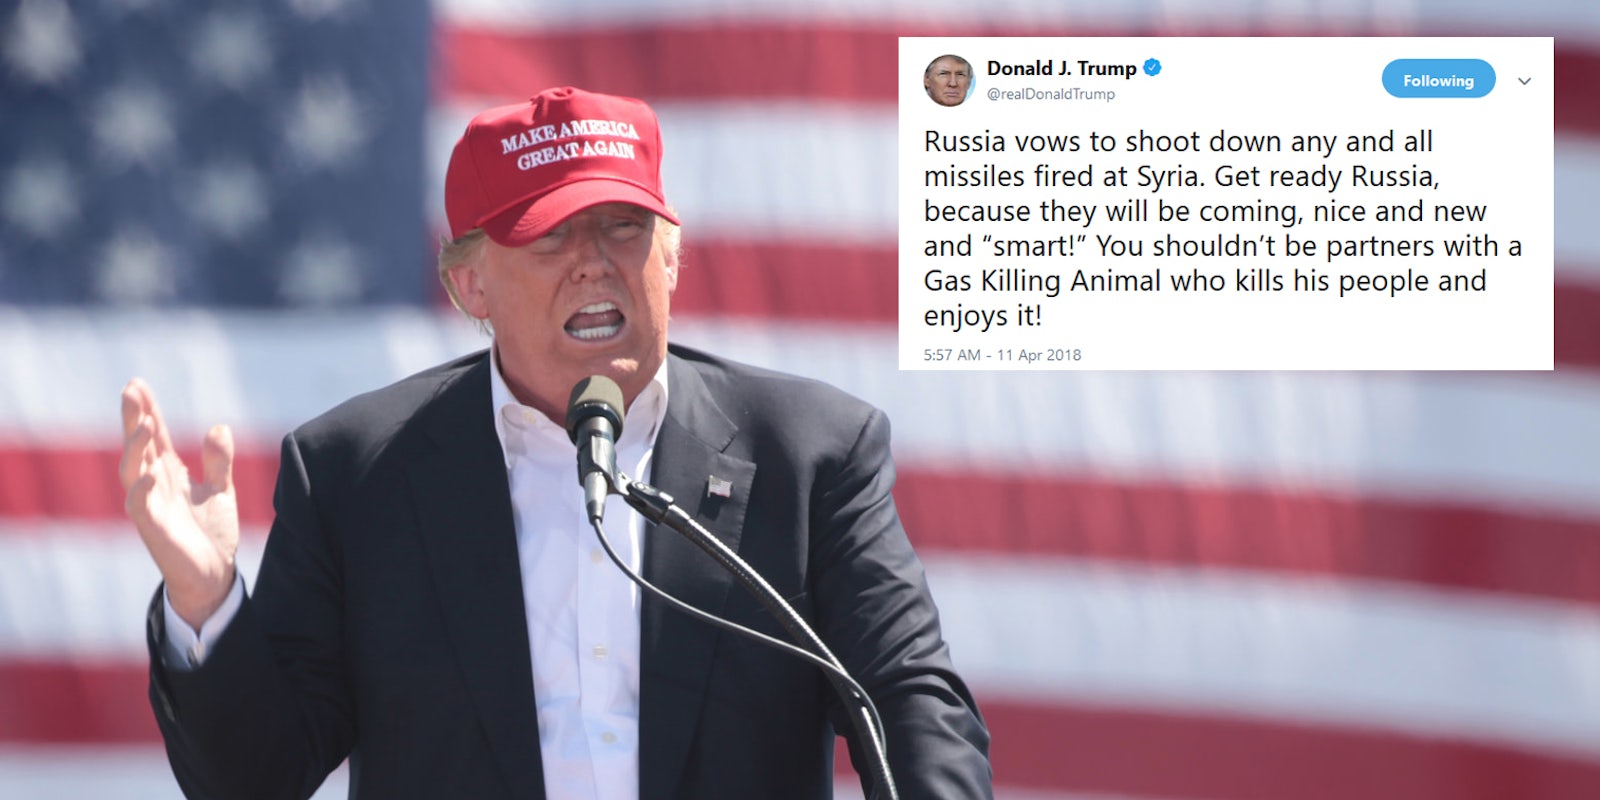 President Donald Trump boasted on Wednesday about the 'nice and new and 'smart'' missiles that would be fired in Syria while taunting Russia–sparking many people to fear that the president was playing fast-and-loose with international relations over Twitter.